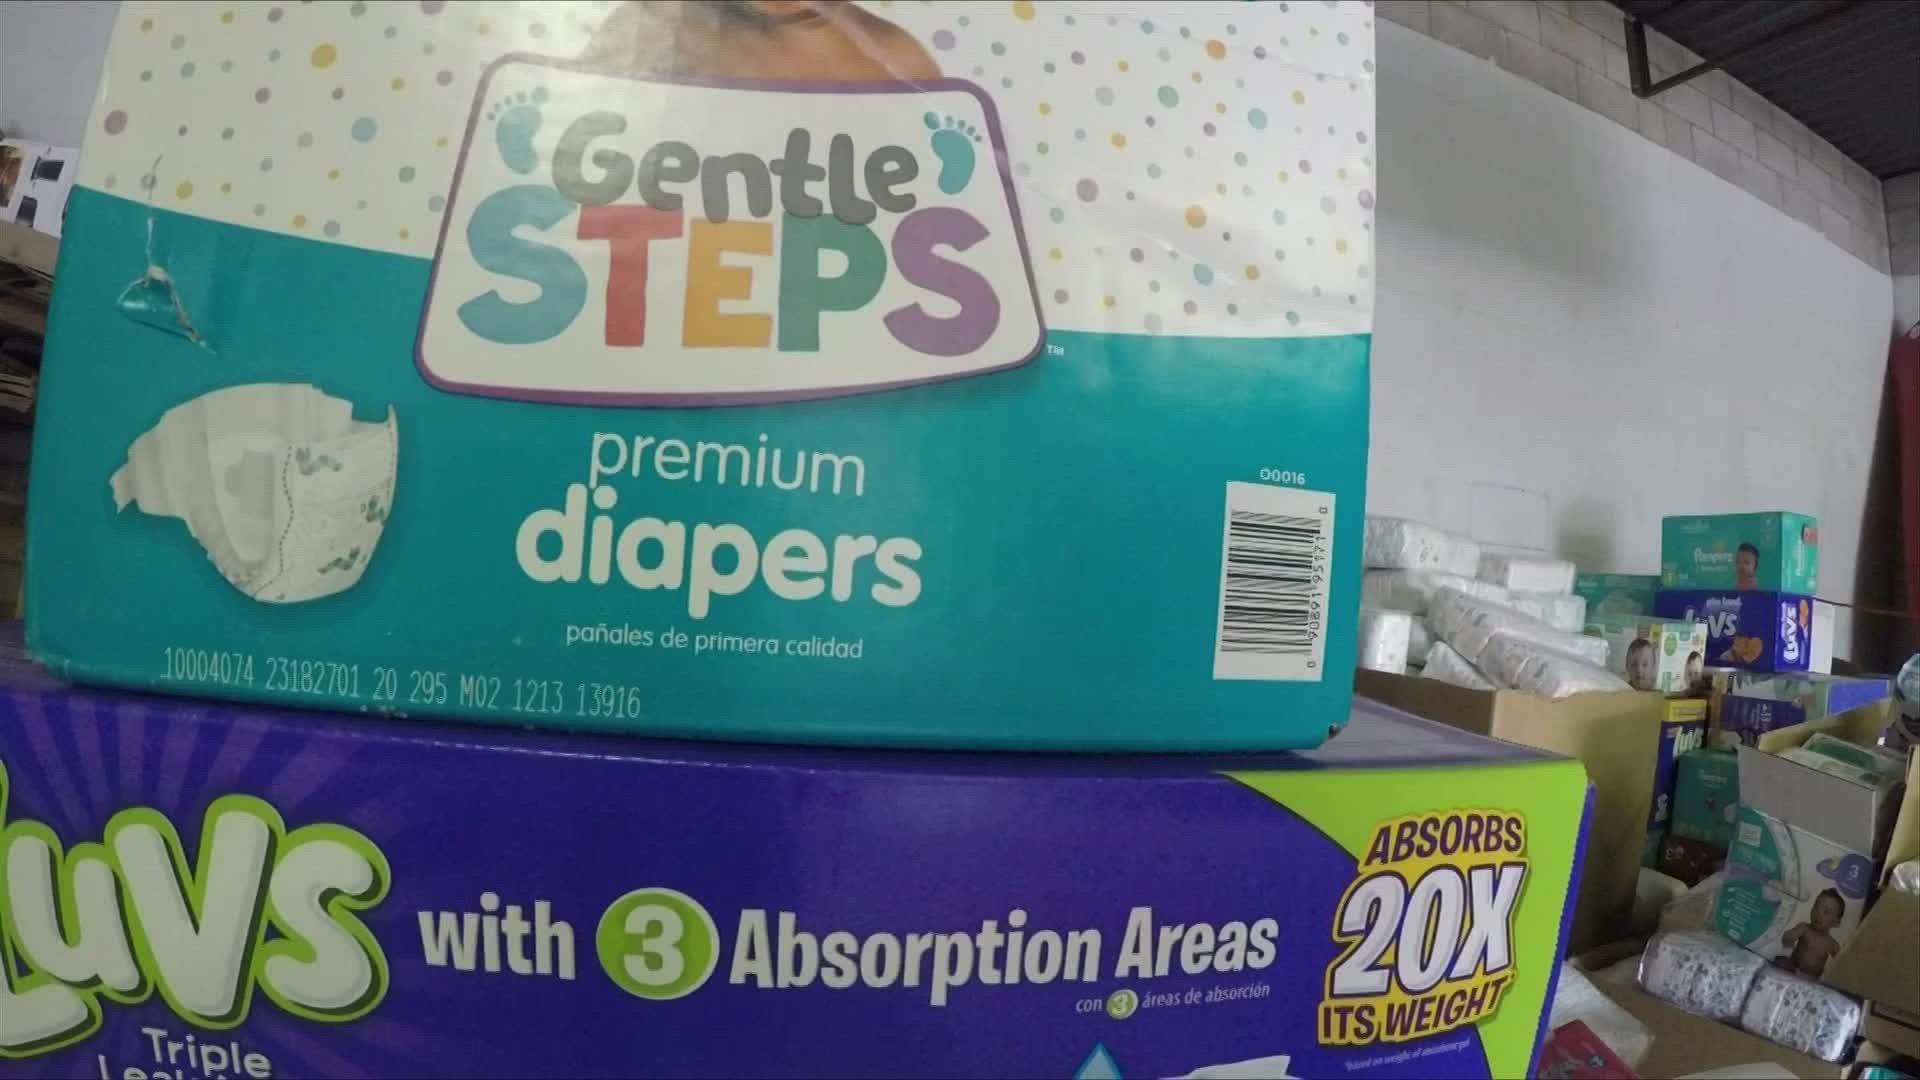 The higher diaper demand in diapers is being attributed to people not being able to find jobs that pay enough to support their families.